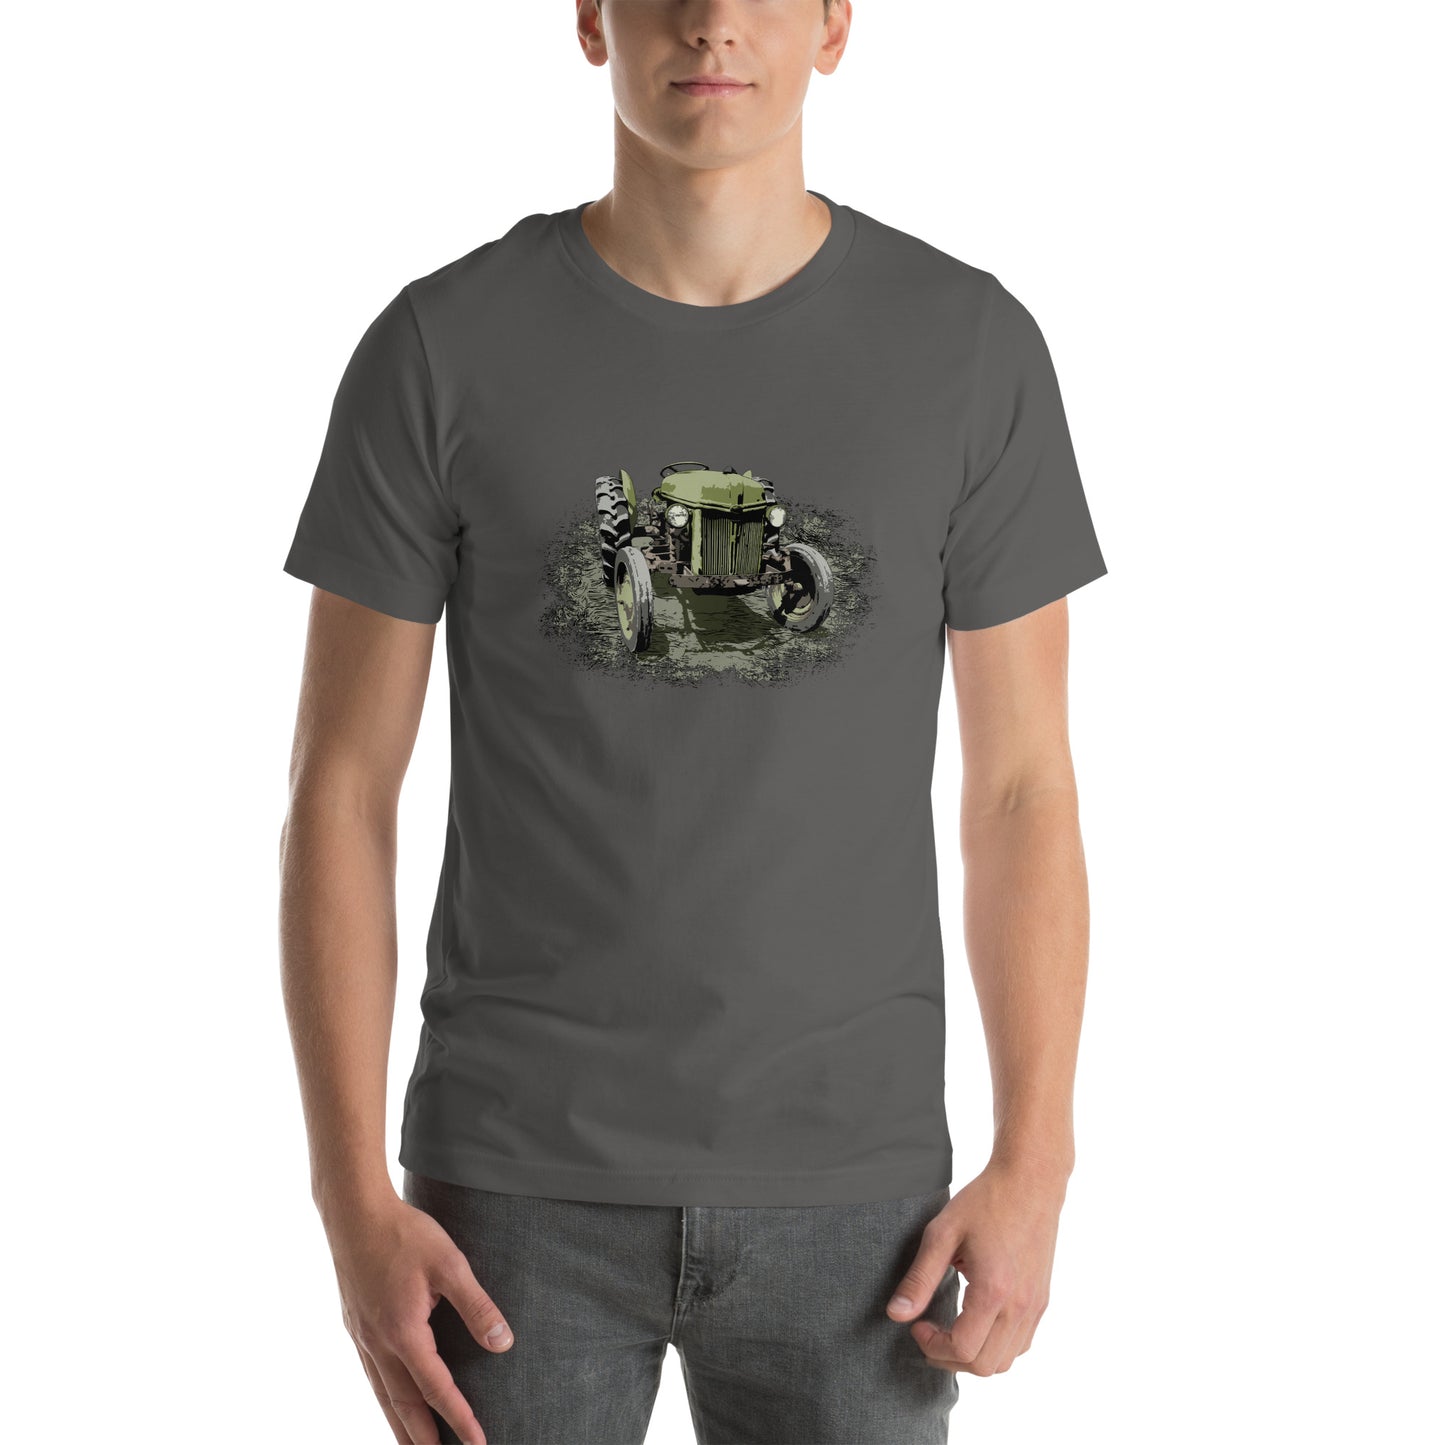 Rustic Farming - Antique Green Farm Tractor Unisex t-shirt -  Vintage Ford Tractor